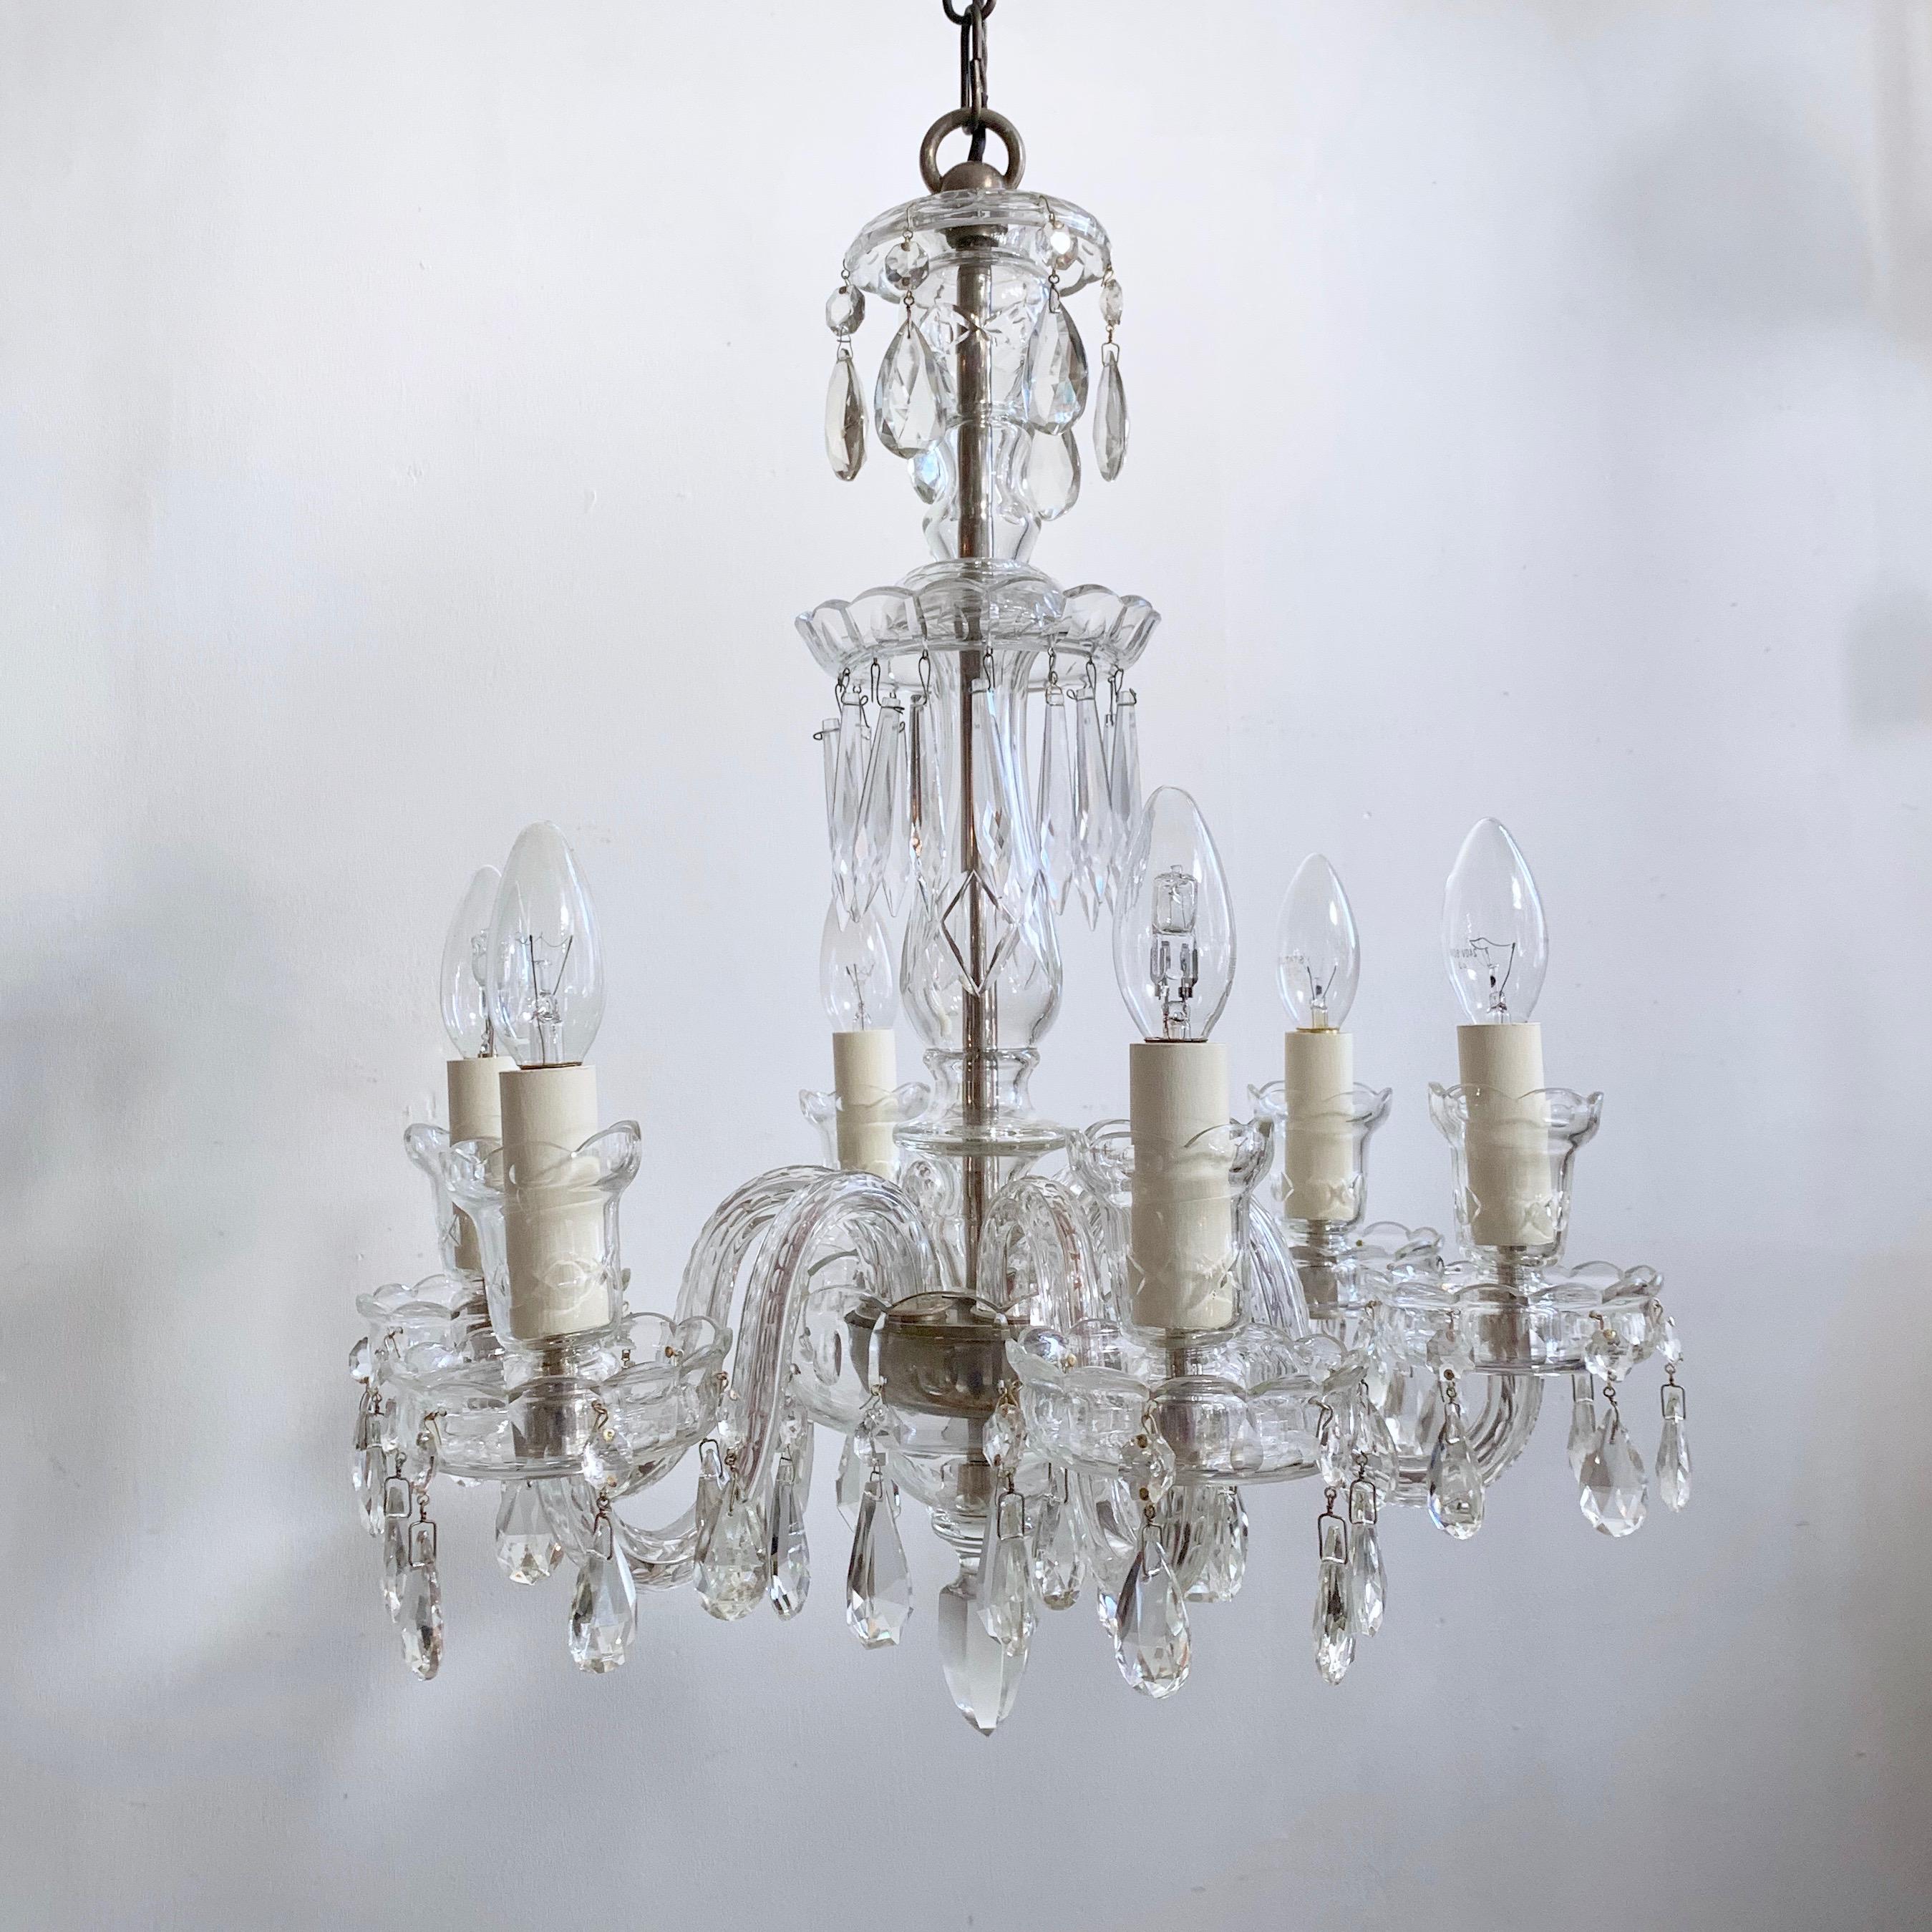 Early 1900s Czech Crystal Bohemian Chandelier In Good Condition For Sale In Stockport, GB